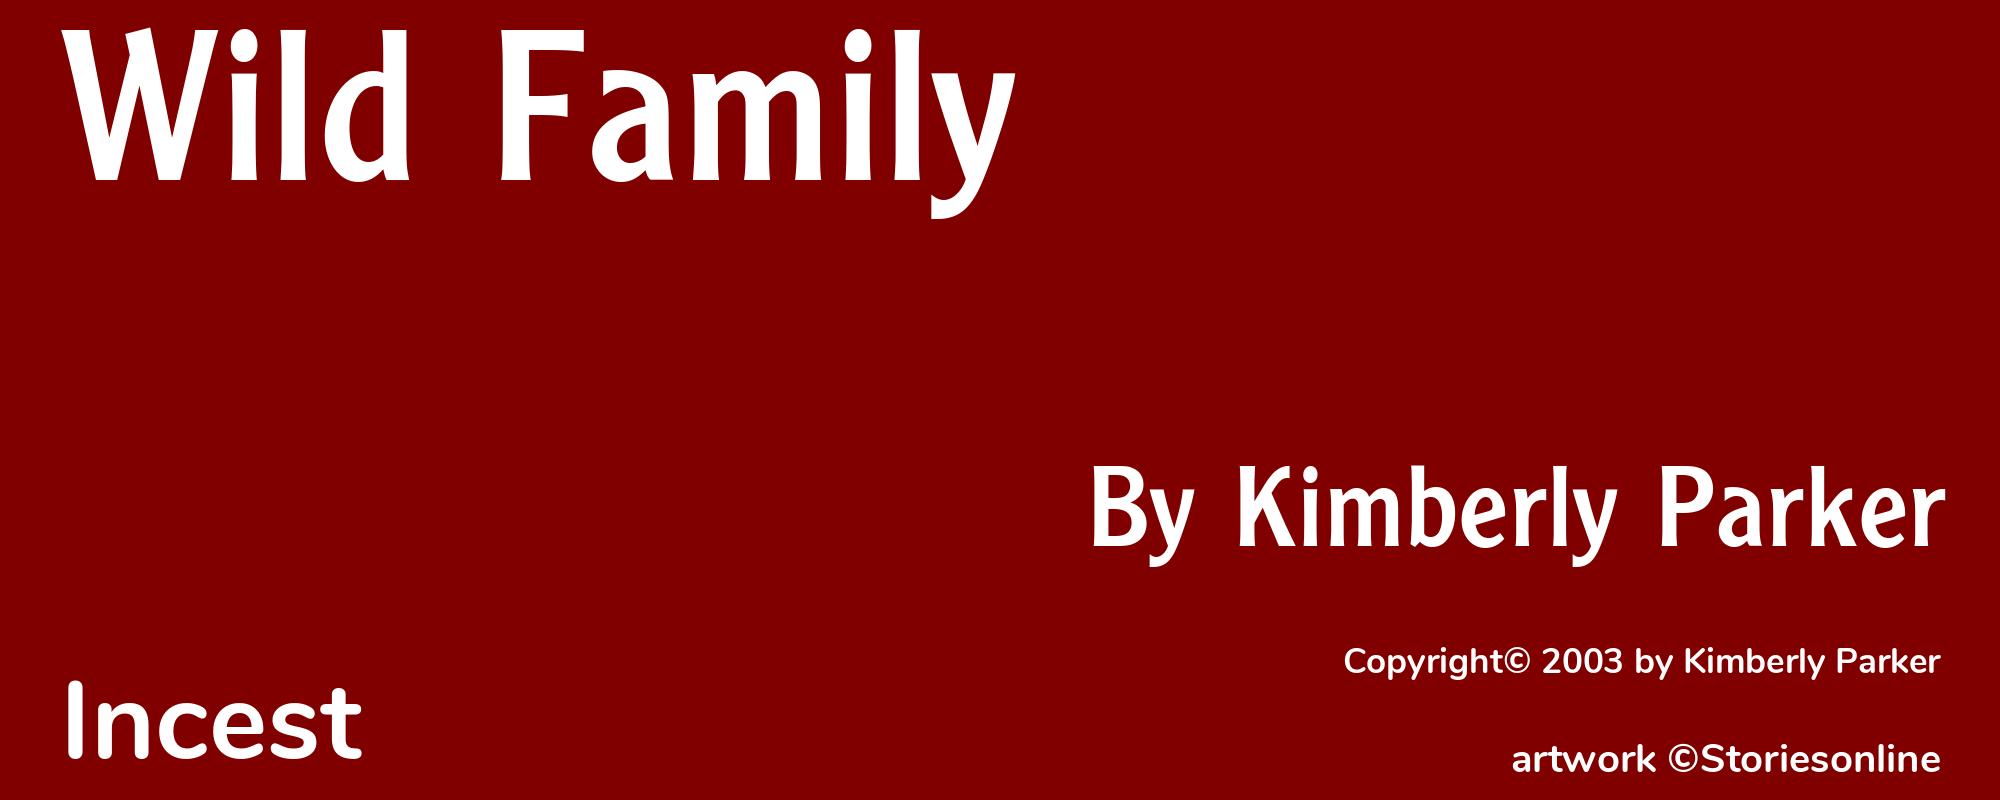 Wild Family - Cover